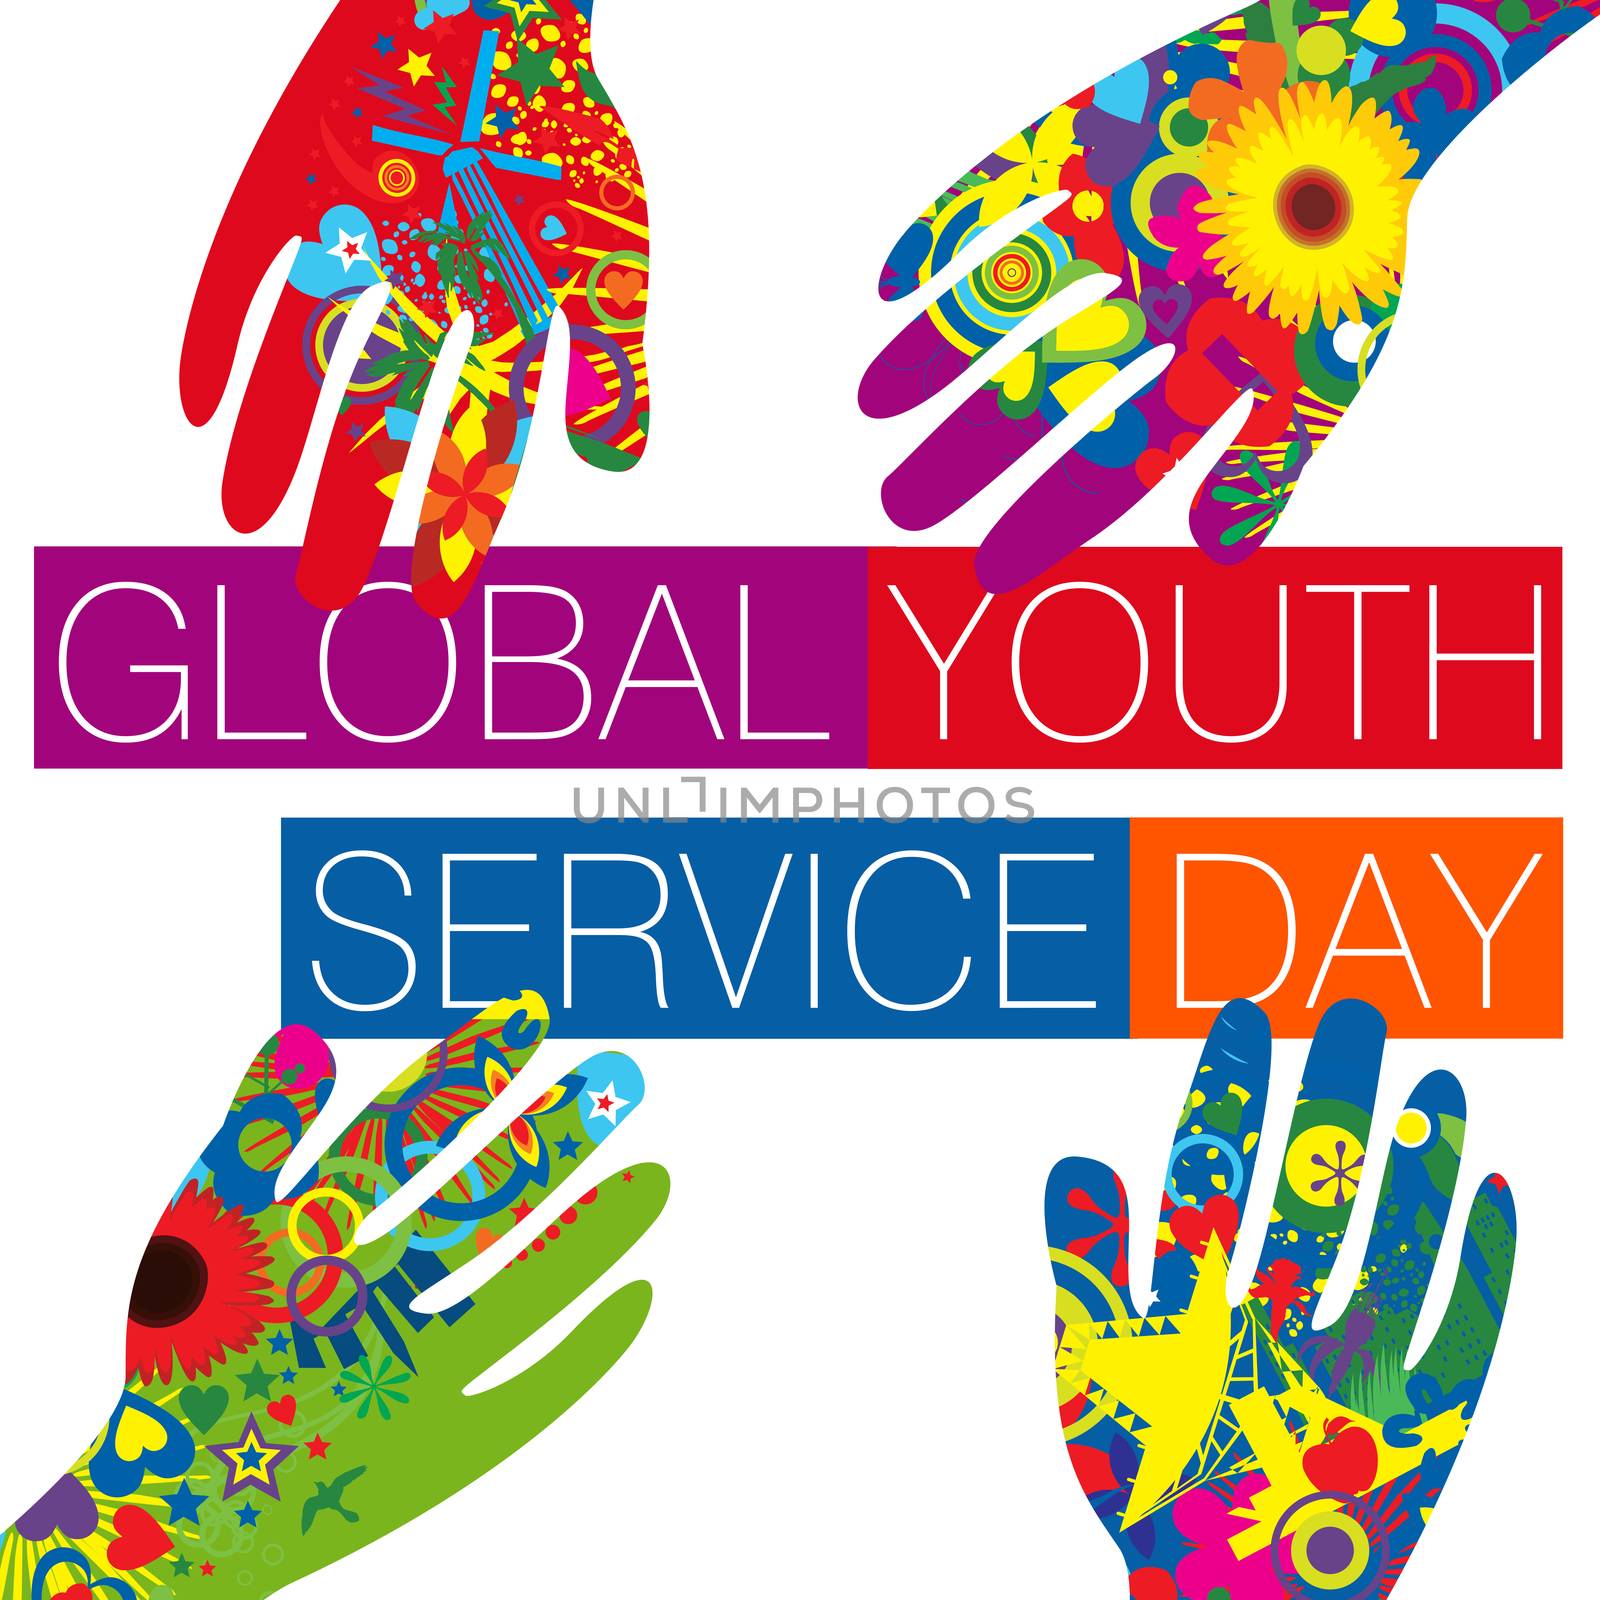 An abstract illustration on Global Youth Service Day